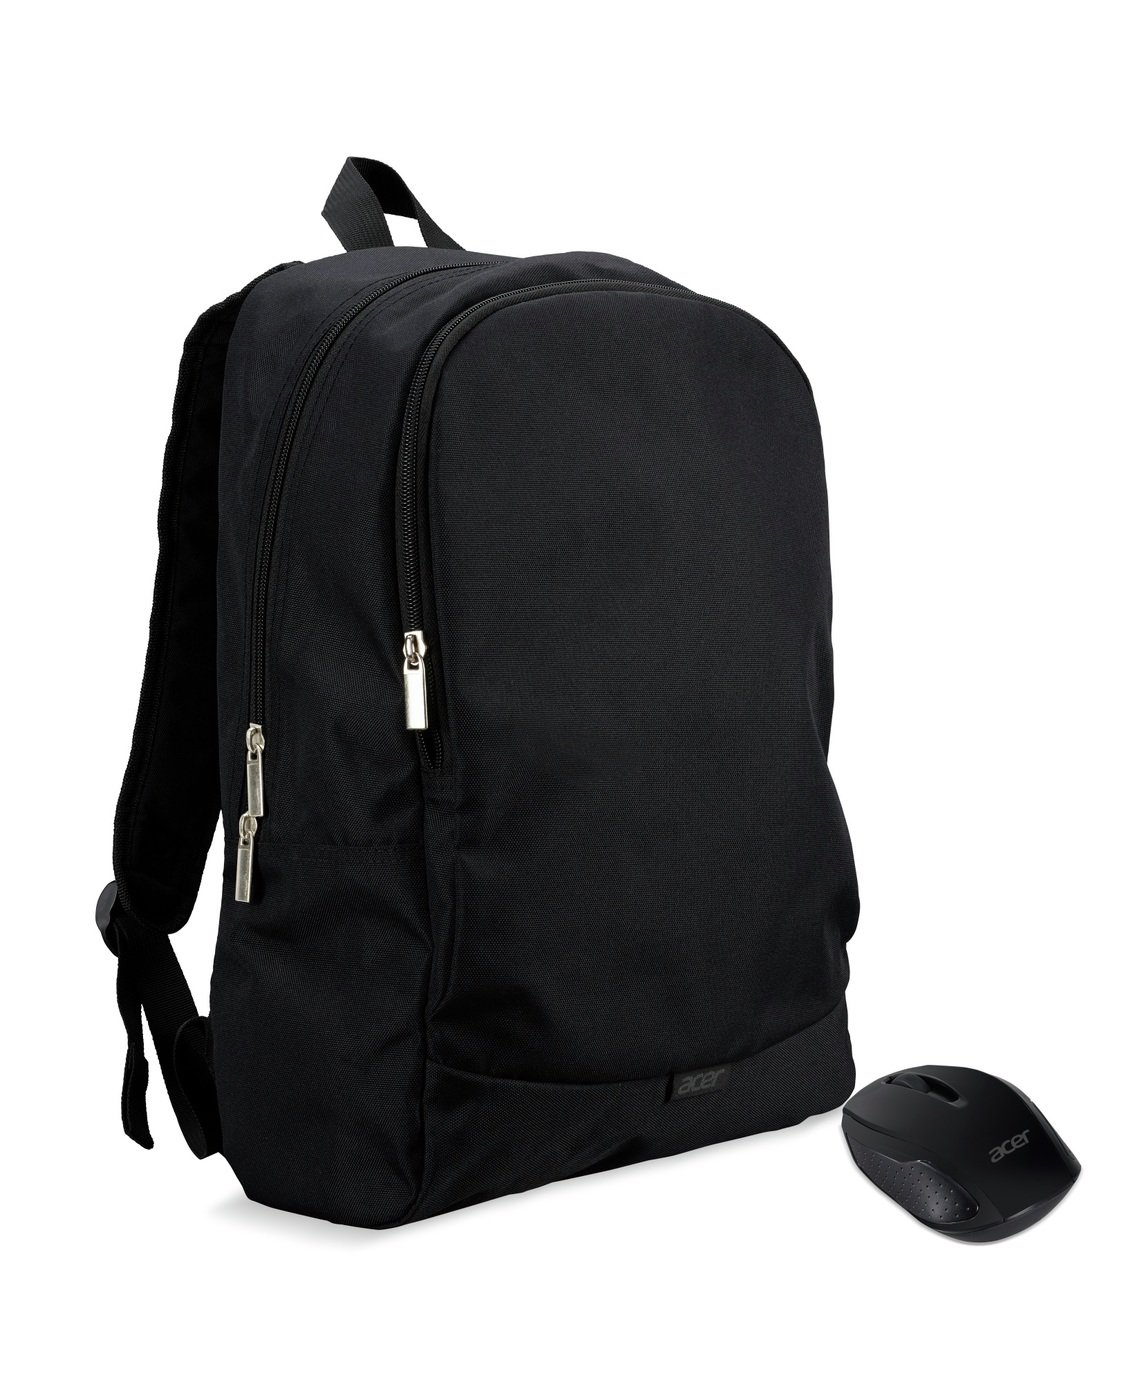 Acer 15.6 Inch Laptop Backpack and Wireless Mouse Review